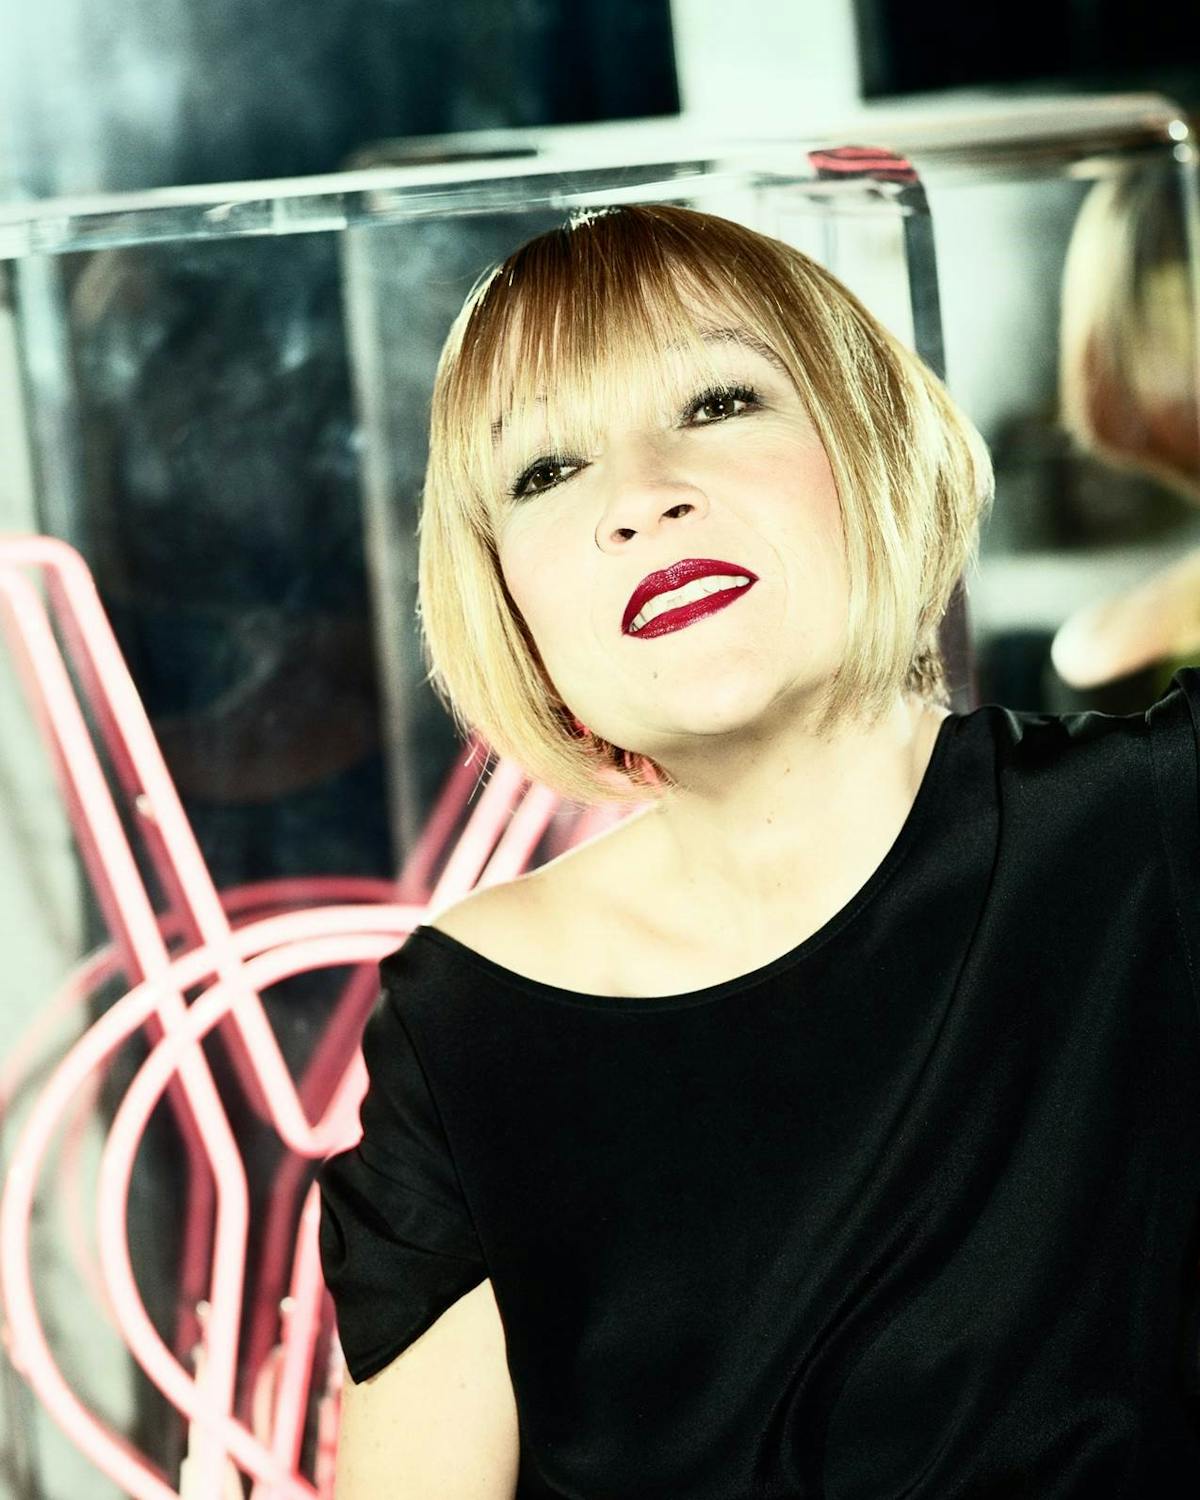 Cindy Gallop live event: book tickets to Stylist Live LUXE